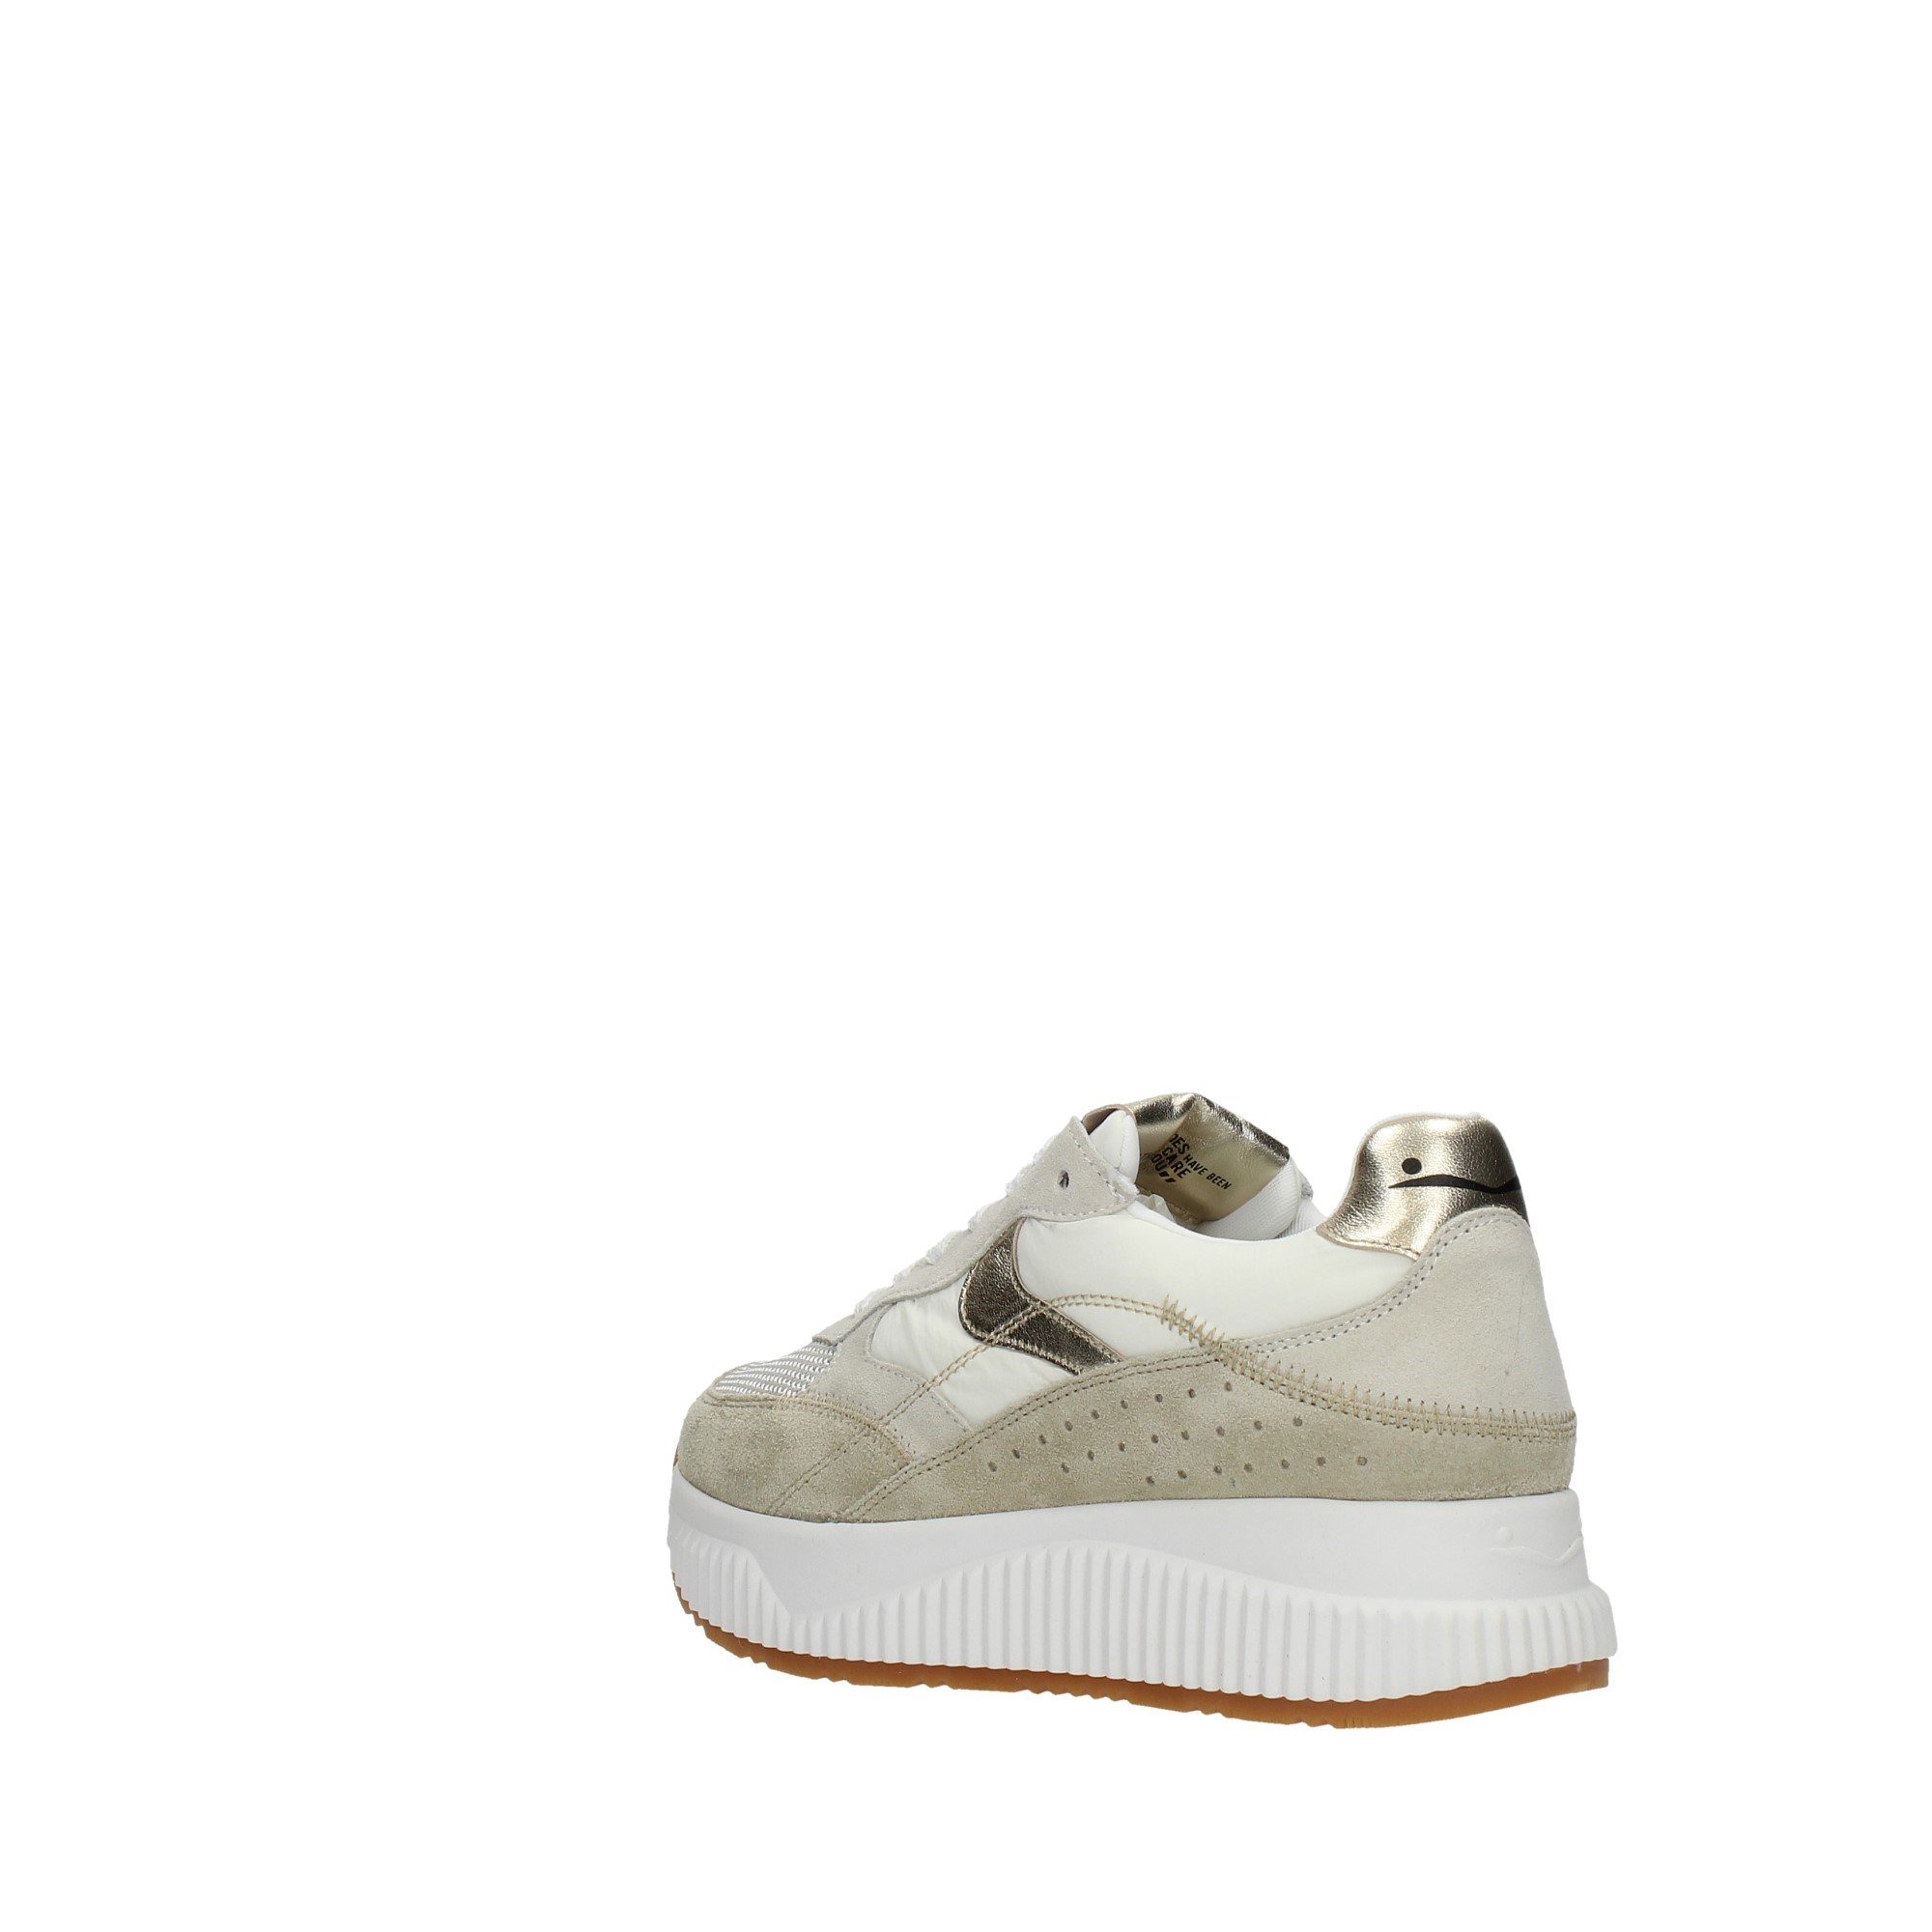 Voile Blanche Shoes Women Sneakers 201-8328-04